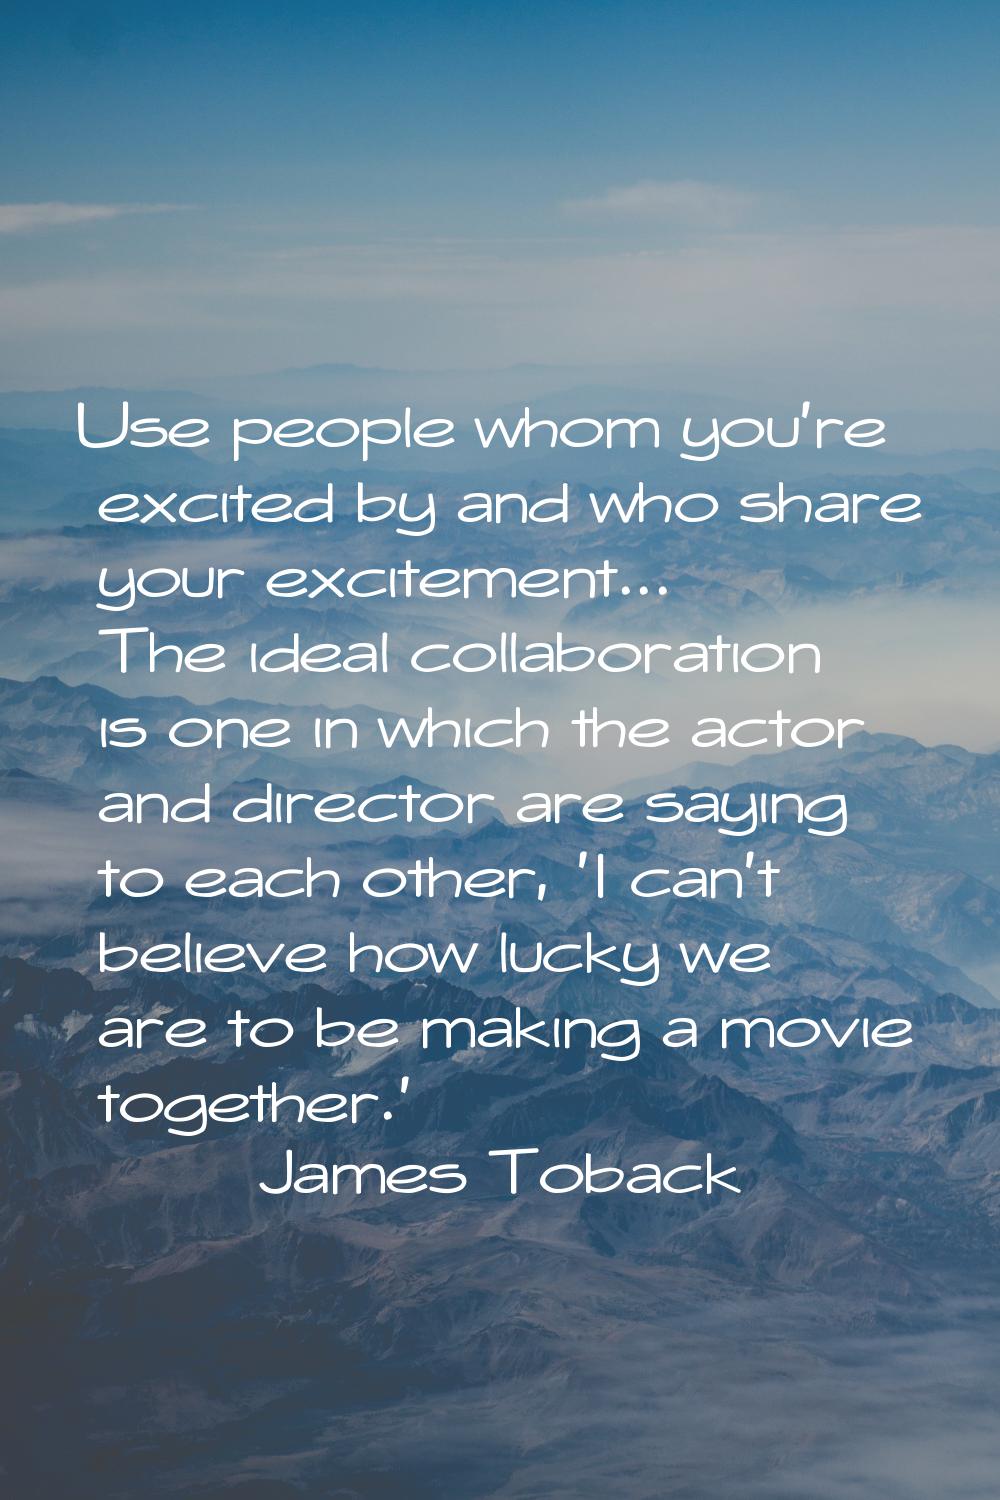 Use people whom you're excited by and who share your excitement... The ideal collaboration is one i